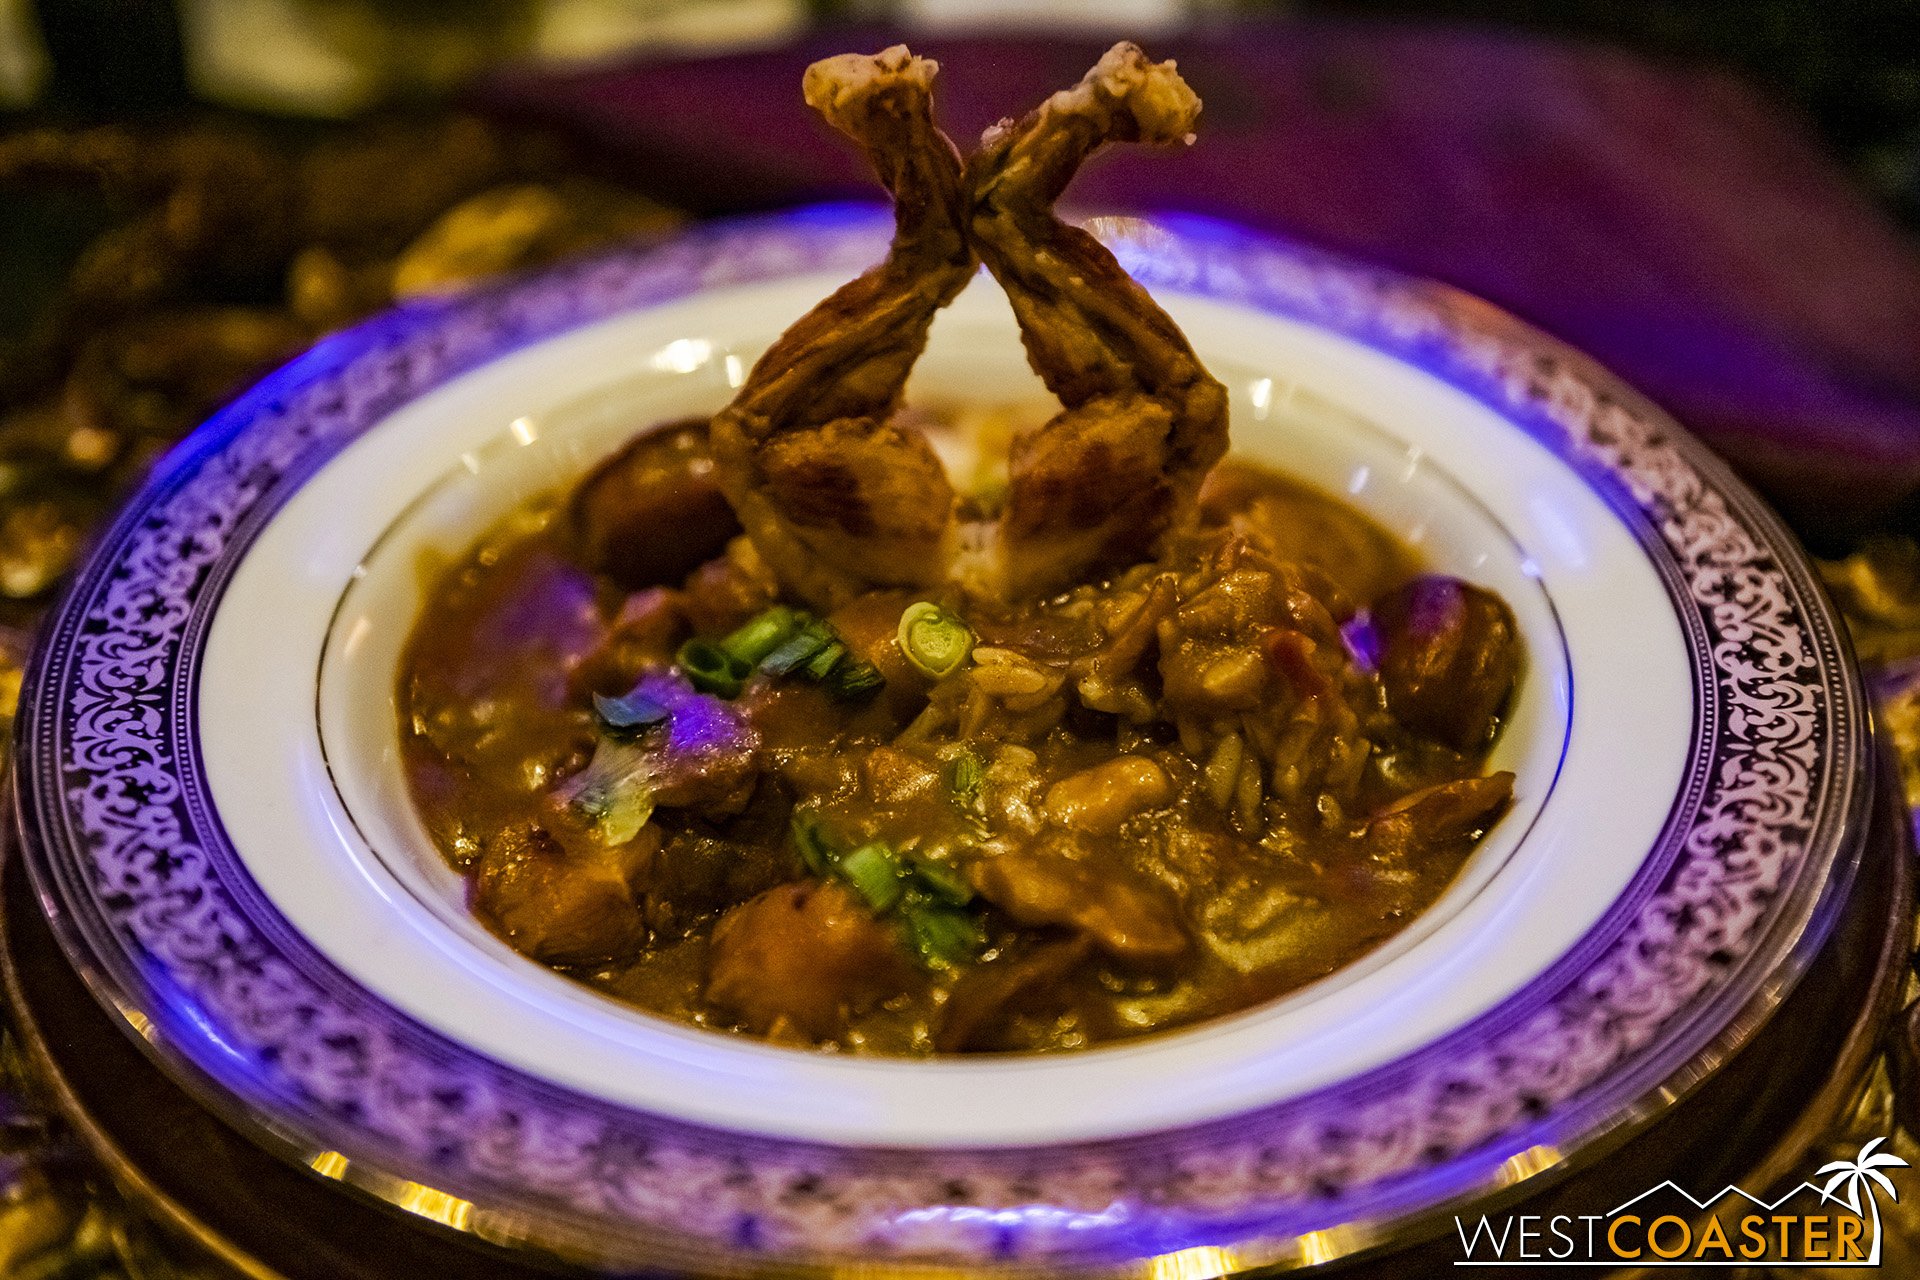  This is the best presentation.  The gumbo was pretty tasty, and we enjoyed the return of the frog legs.  As a garnish, guests who don’t like them can pass, and those who do can enjoy!  (Note: frog really does taste like chicken… but with a bit of a 